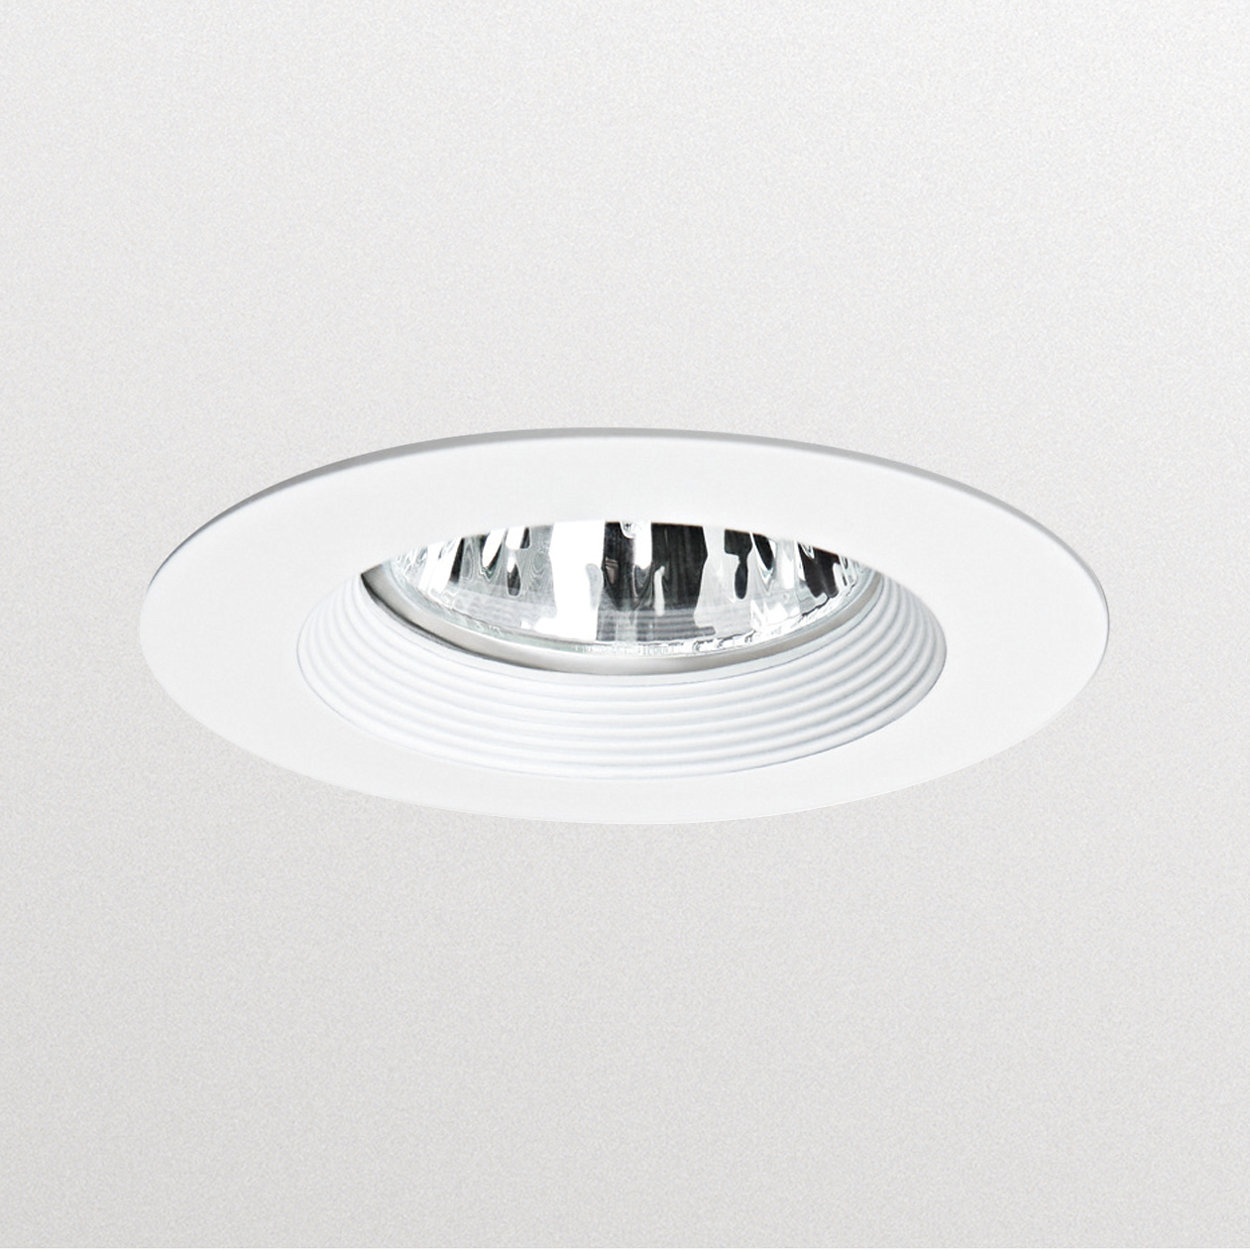 Smart Halogen Downlight – a reliable way to make your merchandise stand out